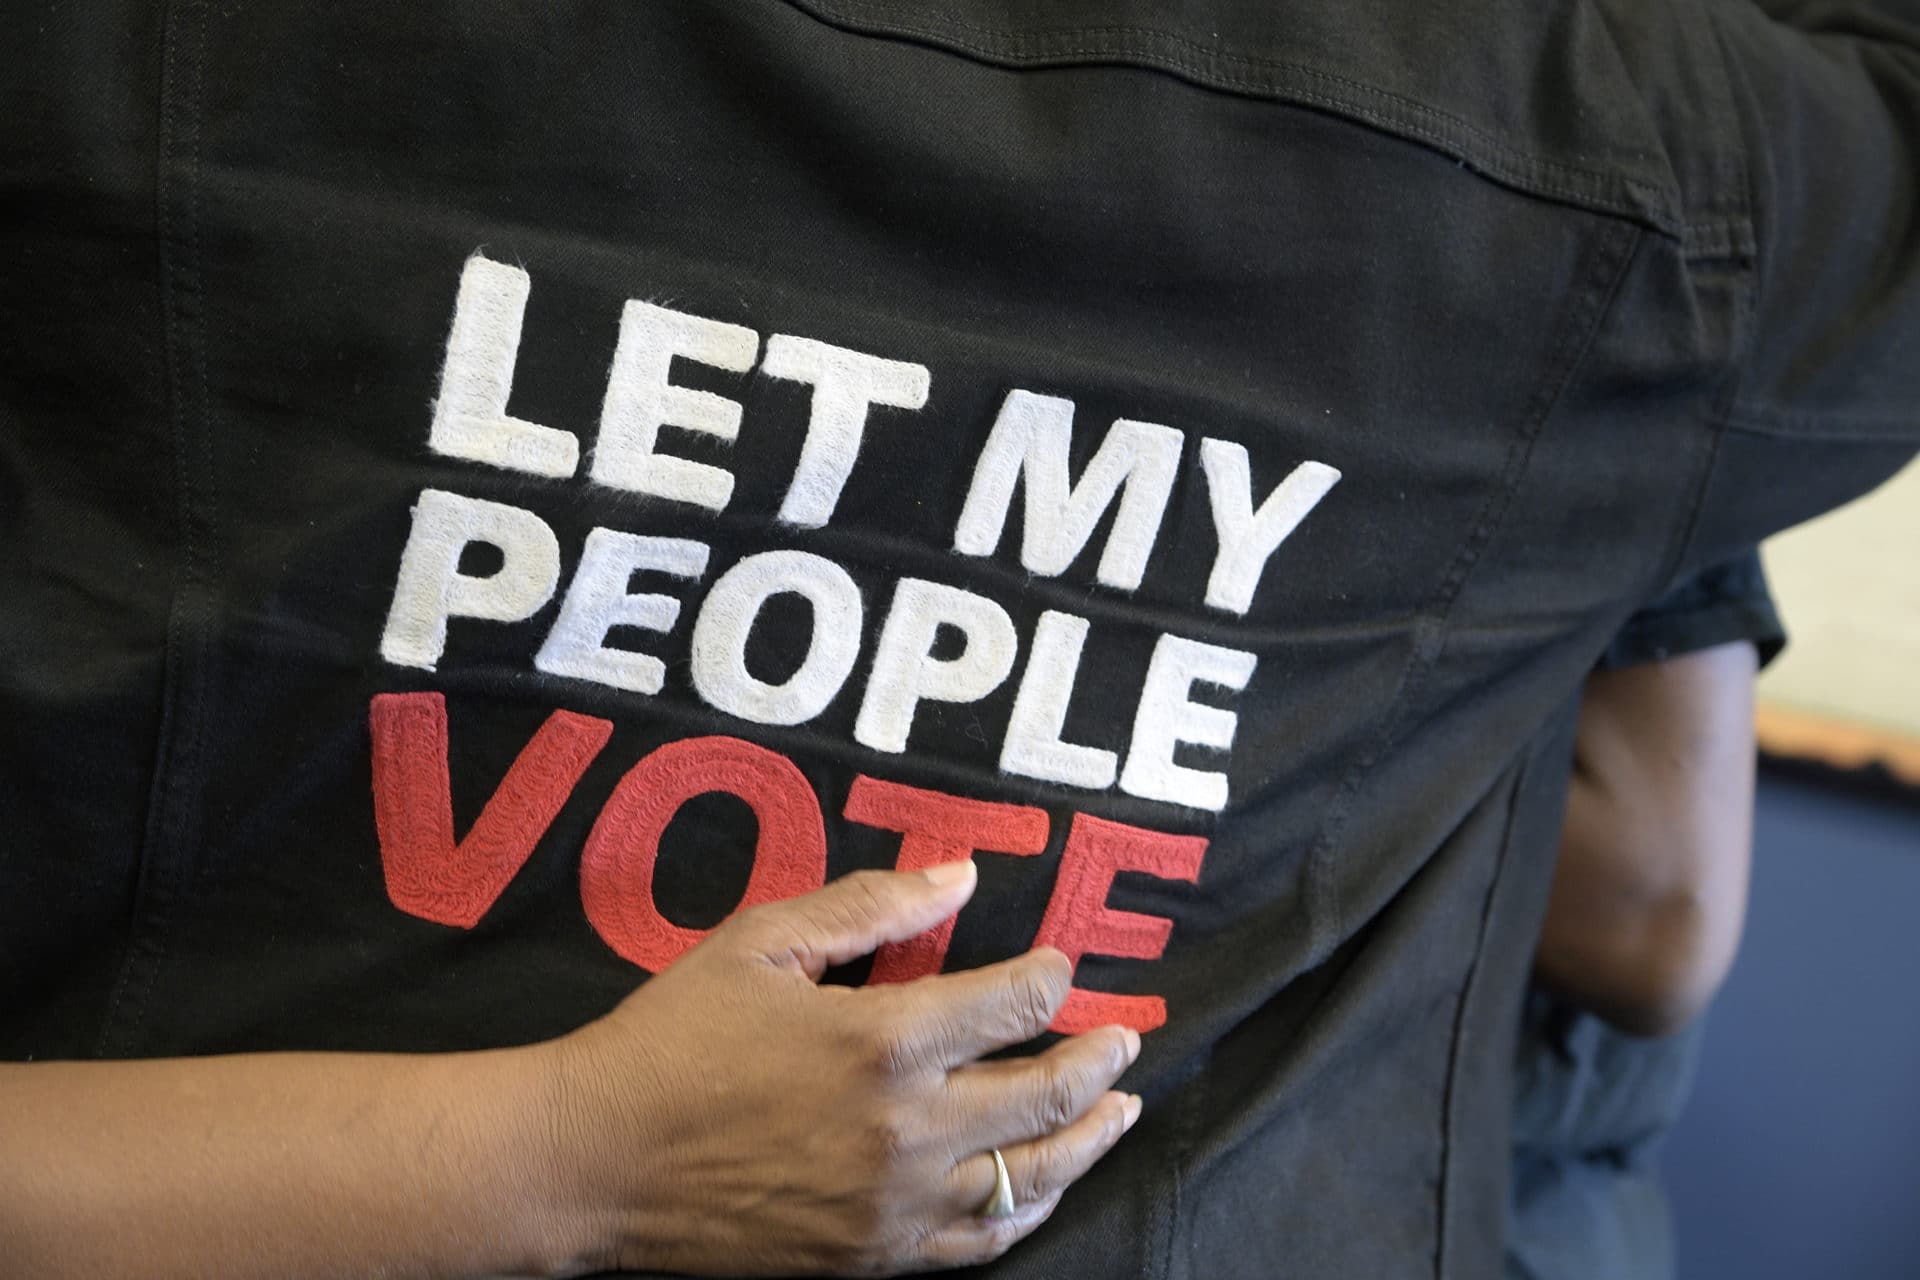 On The Voting Rights Act Anniversary, It’s Time to Restore The Vote And End Voter Suppression